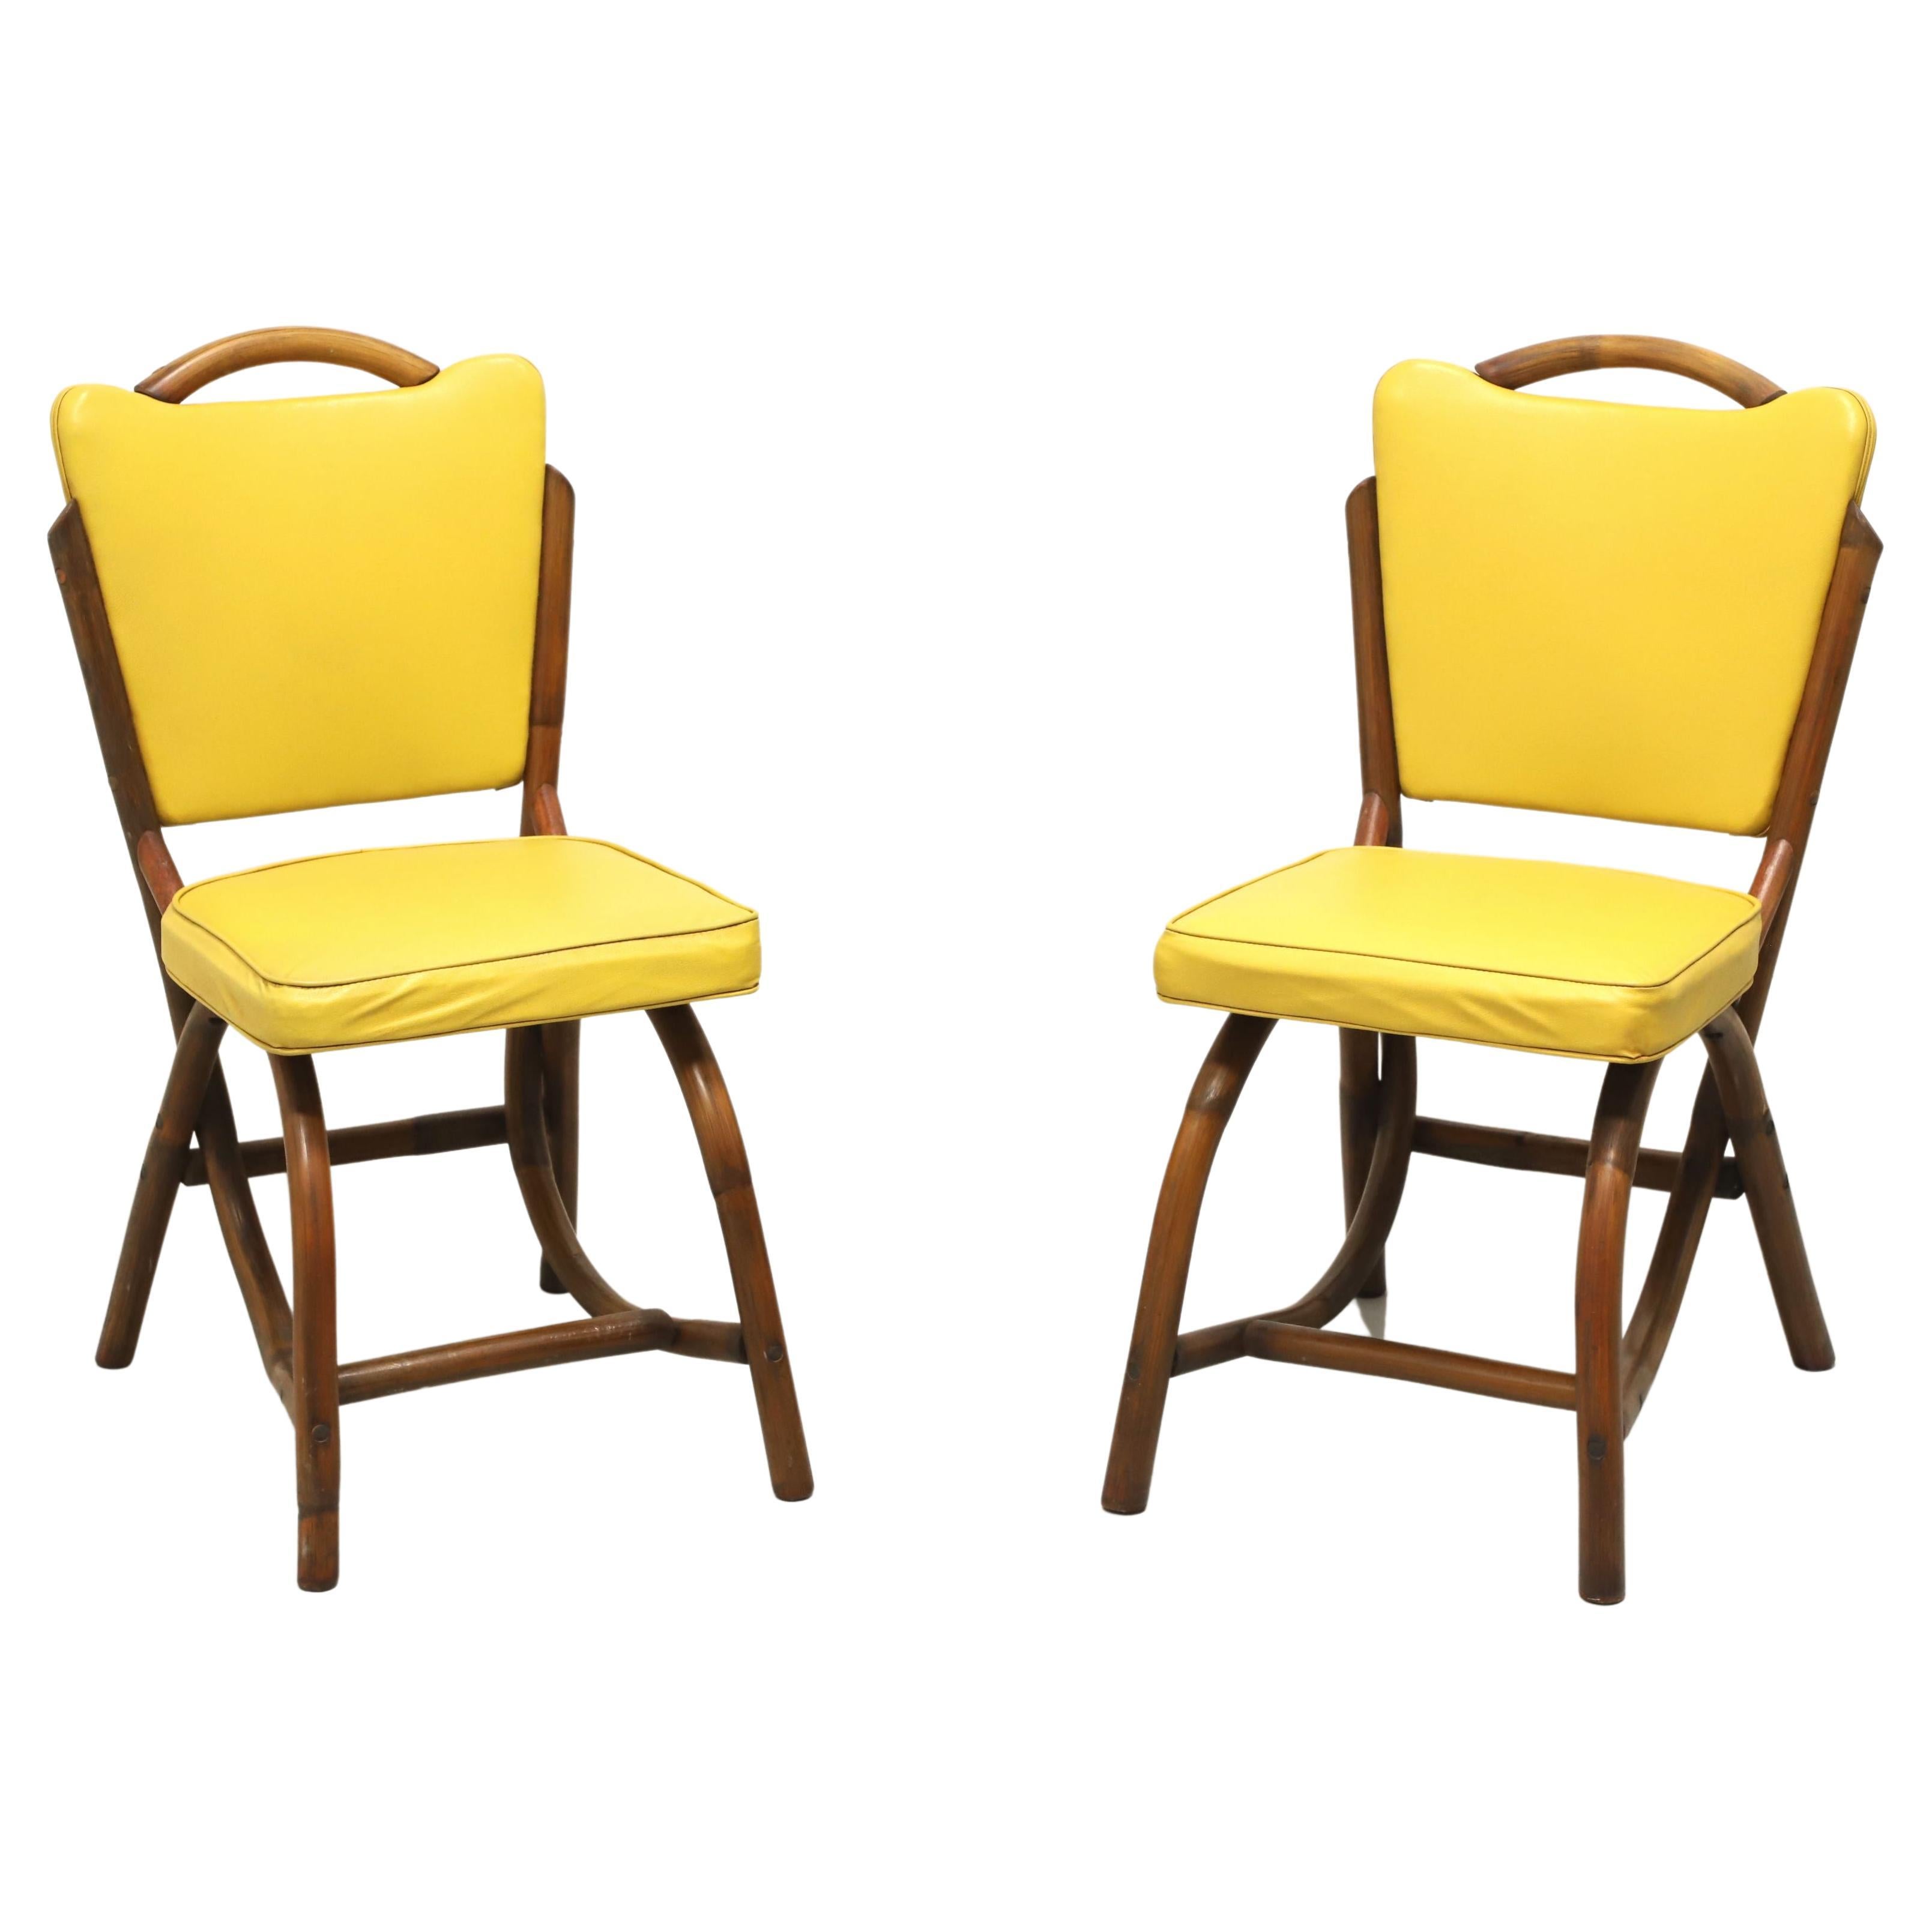 BAM-TAN 1960's Rattan Dining Side Chairs - Pair B For Sale